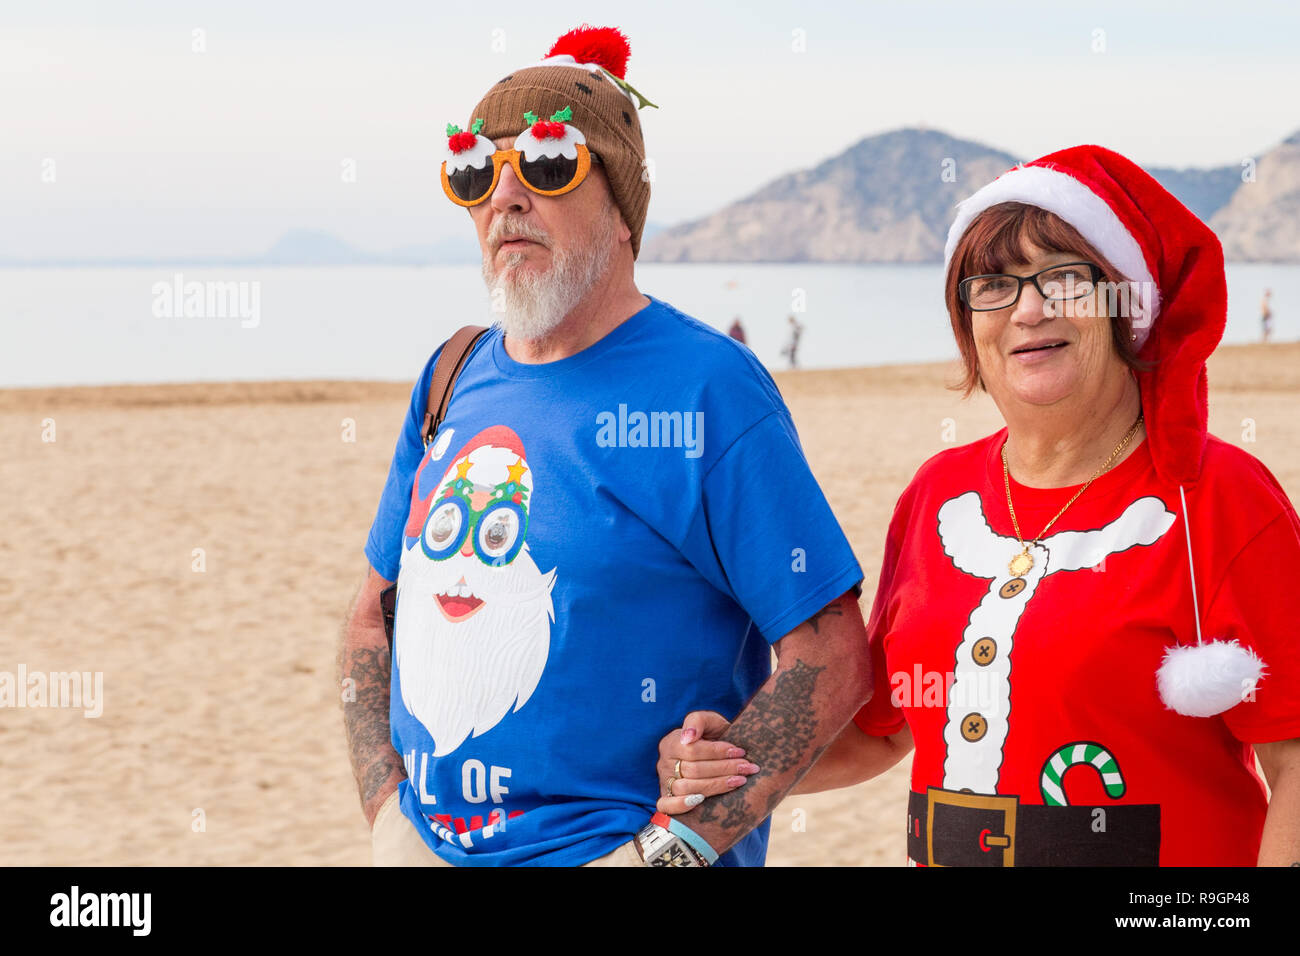 Benidorm, Costa Blanca, Spain, 25th December 2018. British tourists dress for the occasion on Christmas Day in this favourite getaway destination for Brits escaping the cold weather at home. Temperatures will be in the mid to high 20's Celsius today in this mediterranean hotspot. Middle aged couple wearing Christmas Jumpers walking outside on the sea front promenade on Levante Beach with christmas pudding comedy glasses, Stock Photo